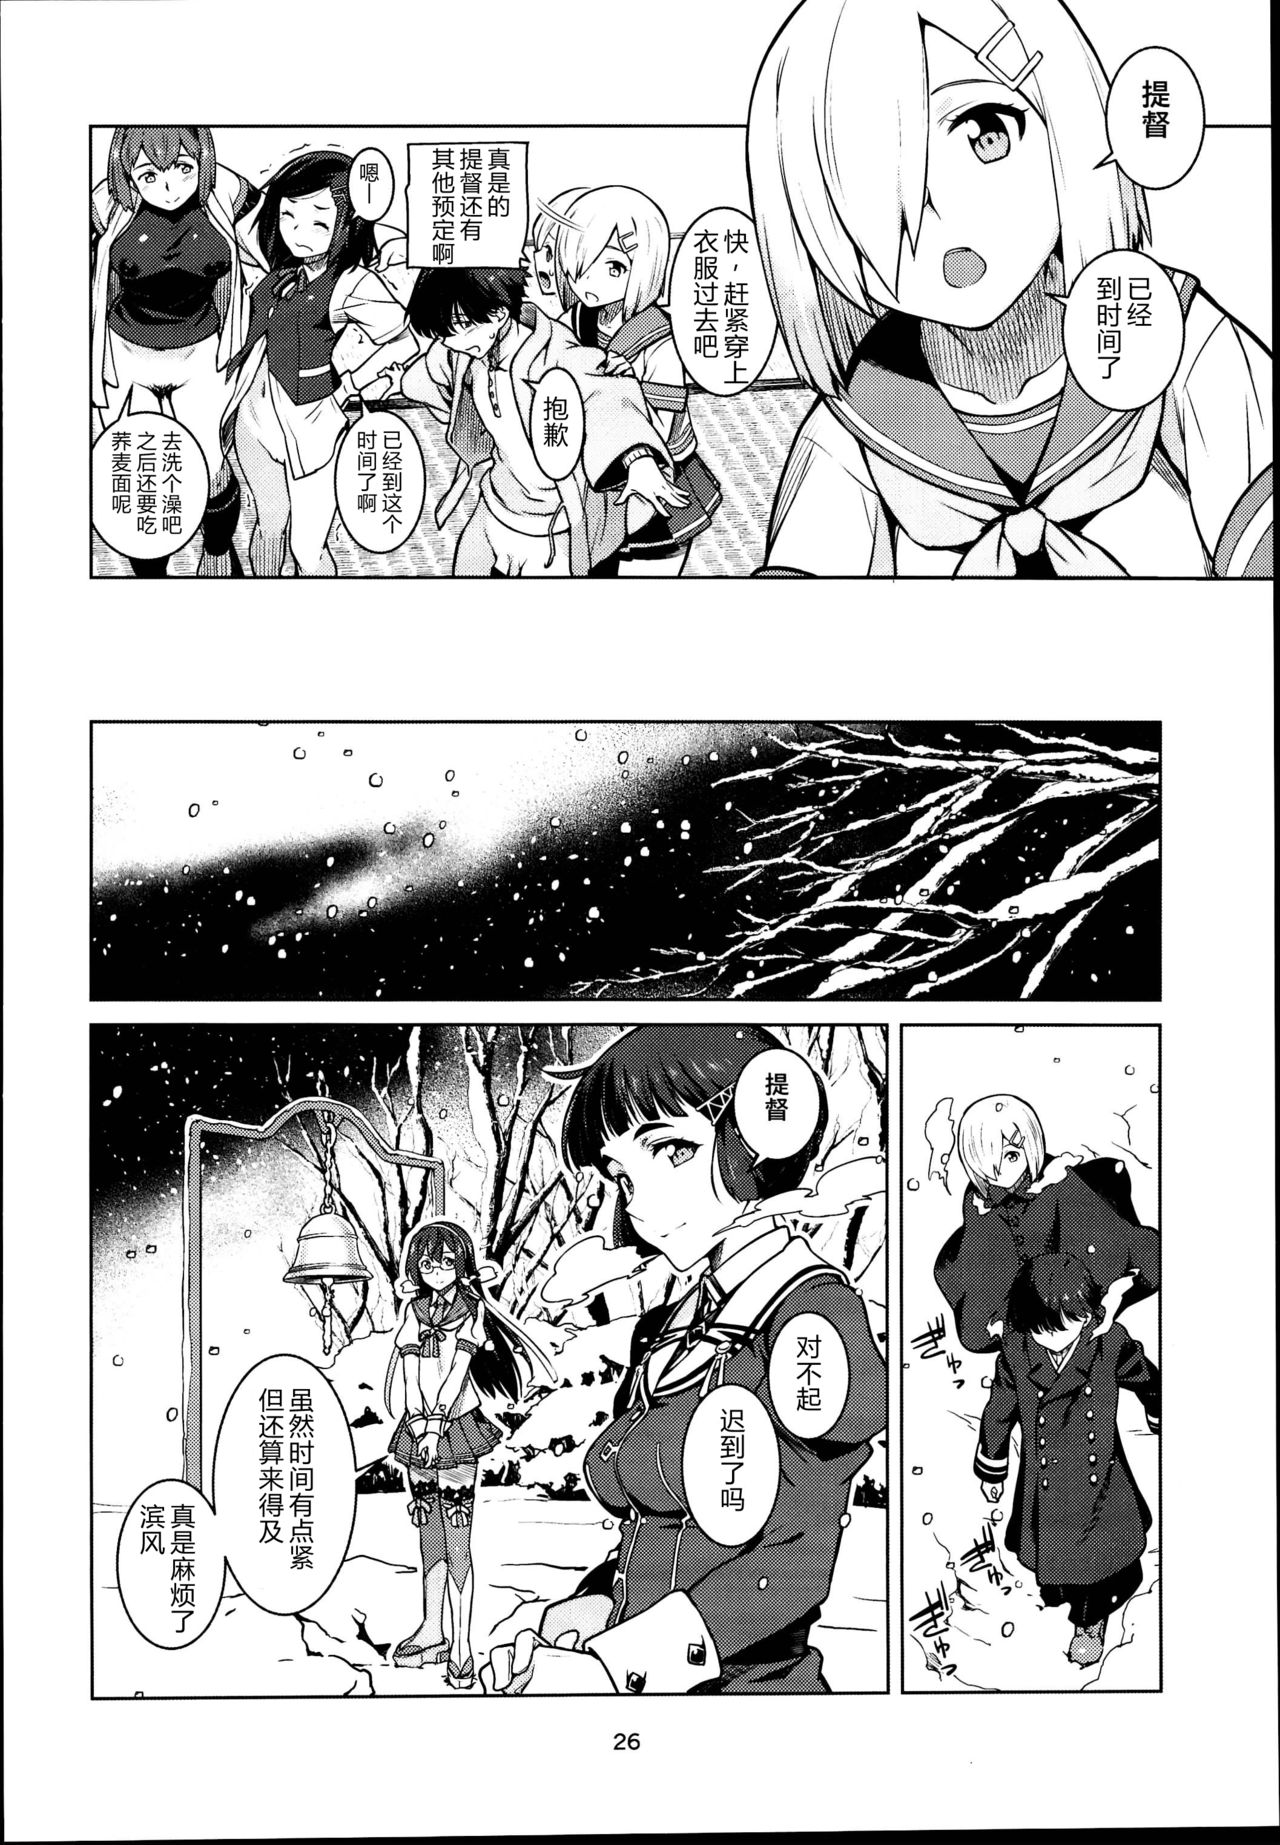 (C95) [Chotto Dake Aruyo. (Takemura Sesshu)] Toshinokure - Ring Out the Old, Ring in the New (Kantai Collection -KanColle-) [Chinese] [鸽鹉LowB与变态社畜今天加班了吗我这本马上翻交流平台汉化组] page 29 full